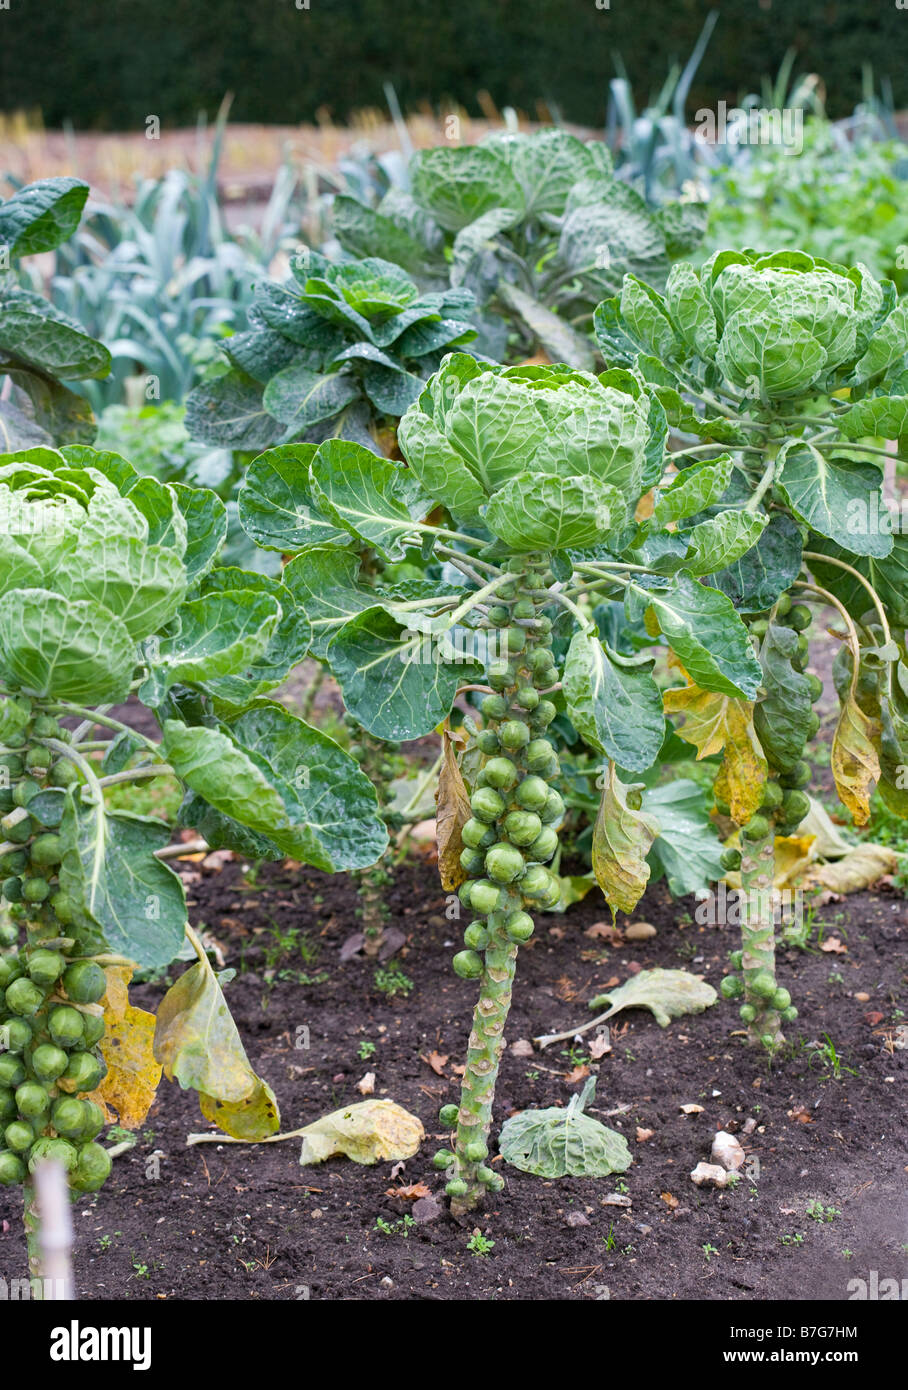 Brussels sprout plant in an allotment Stock Photo